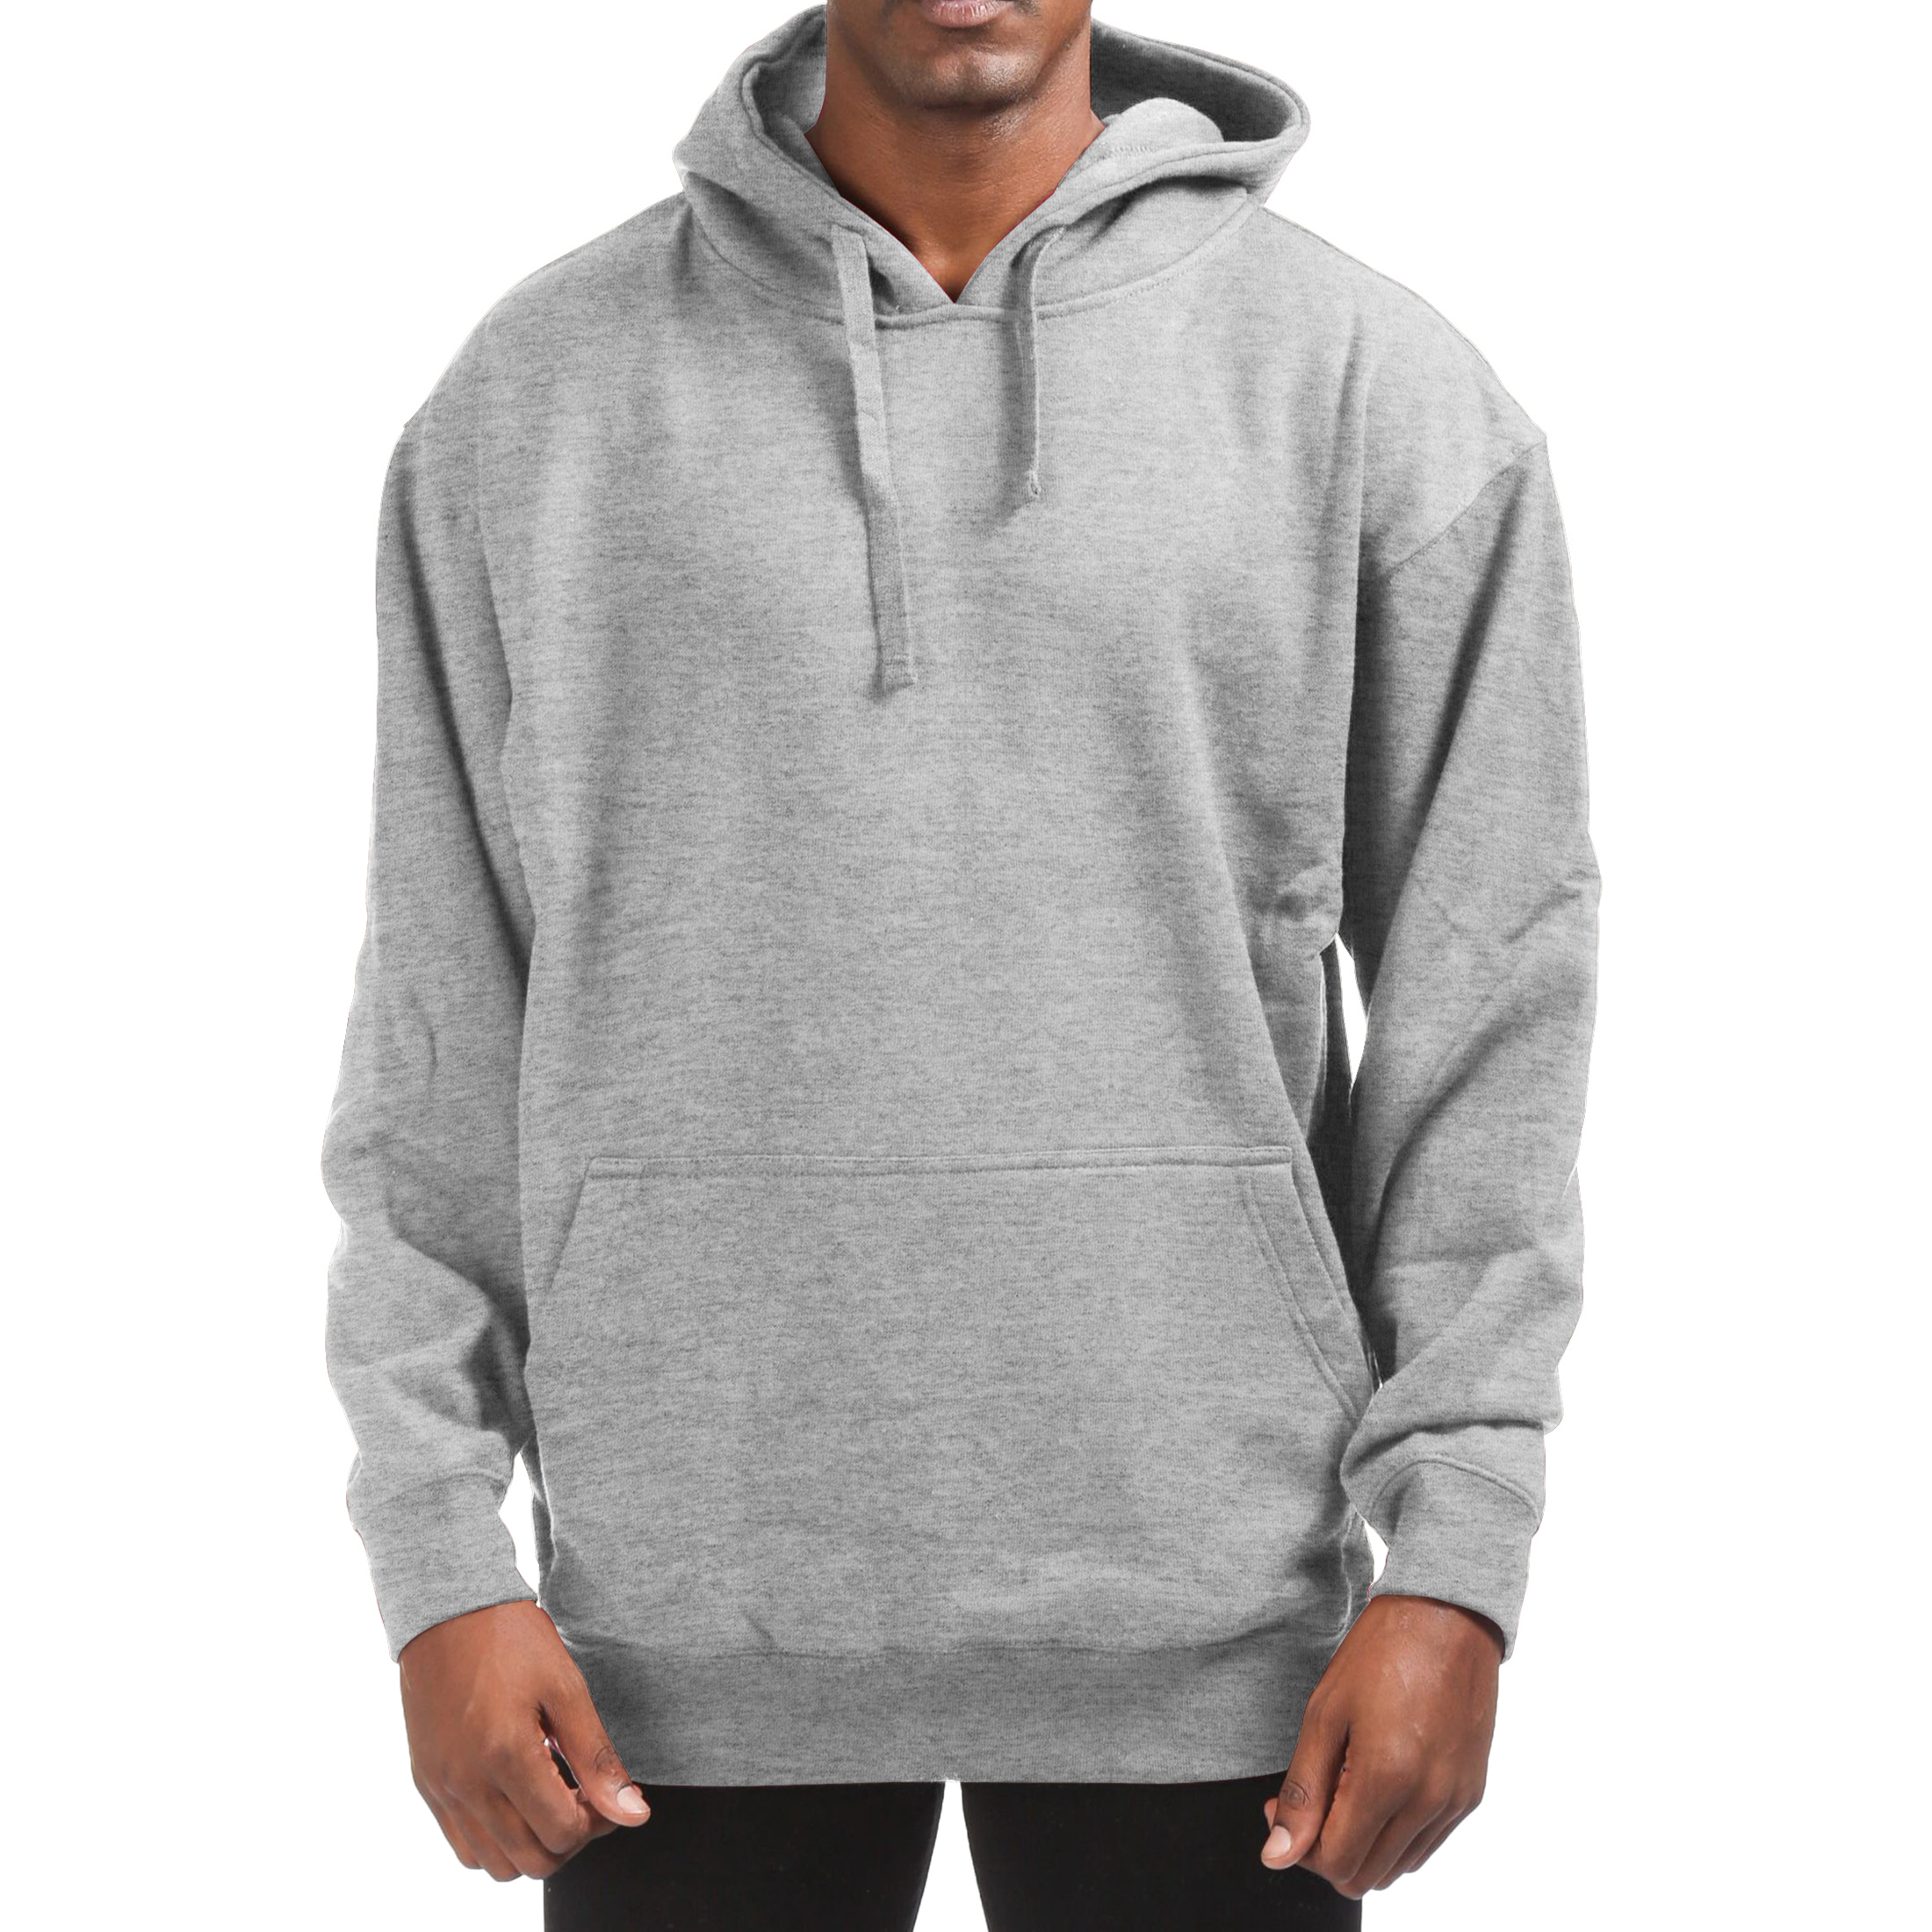 Men's Cotton-Blend Fleece Pullover Hoodie With Pocket (Big & Tall Sizes Available) - Gray, 2X-Large